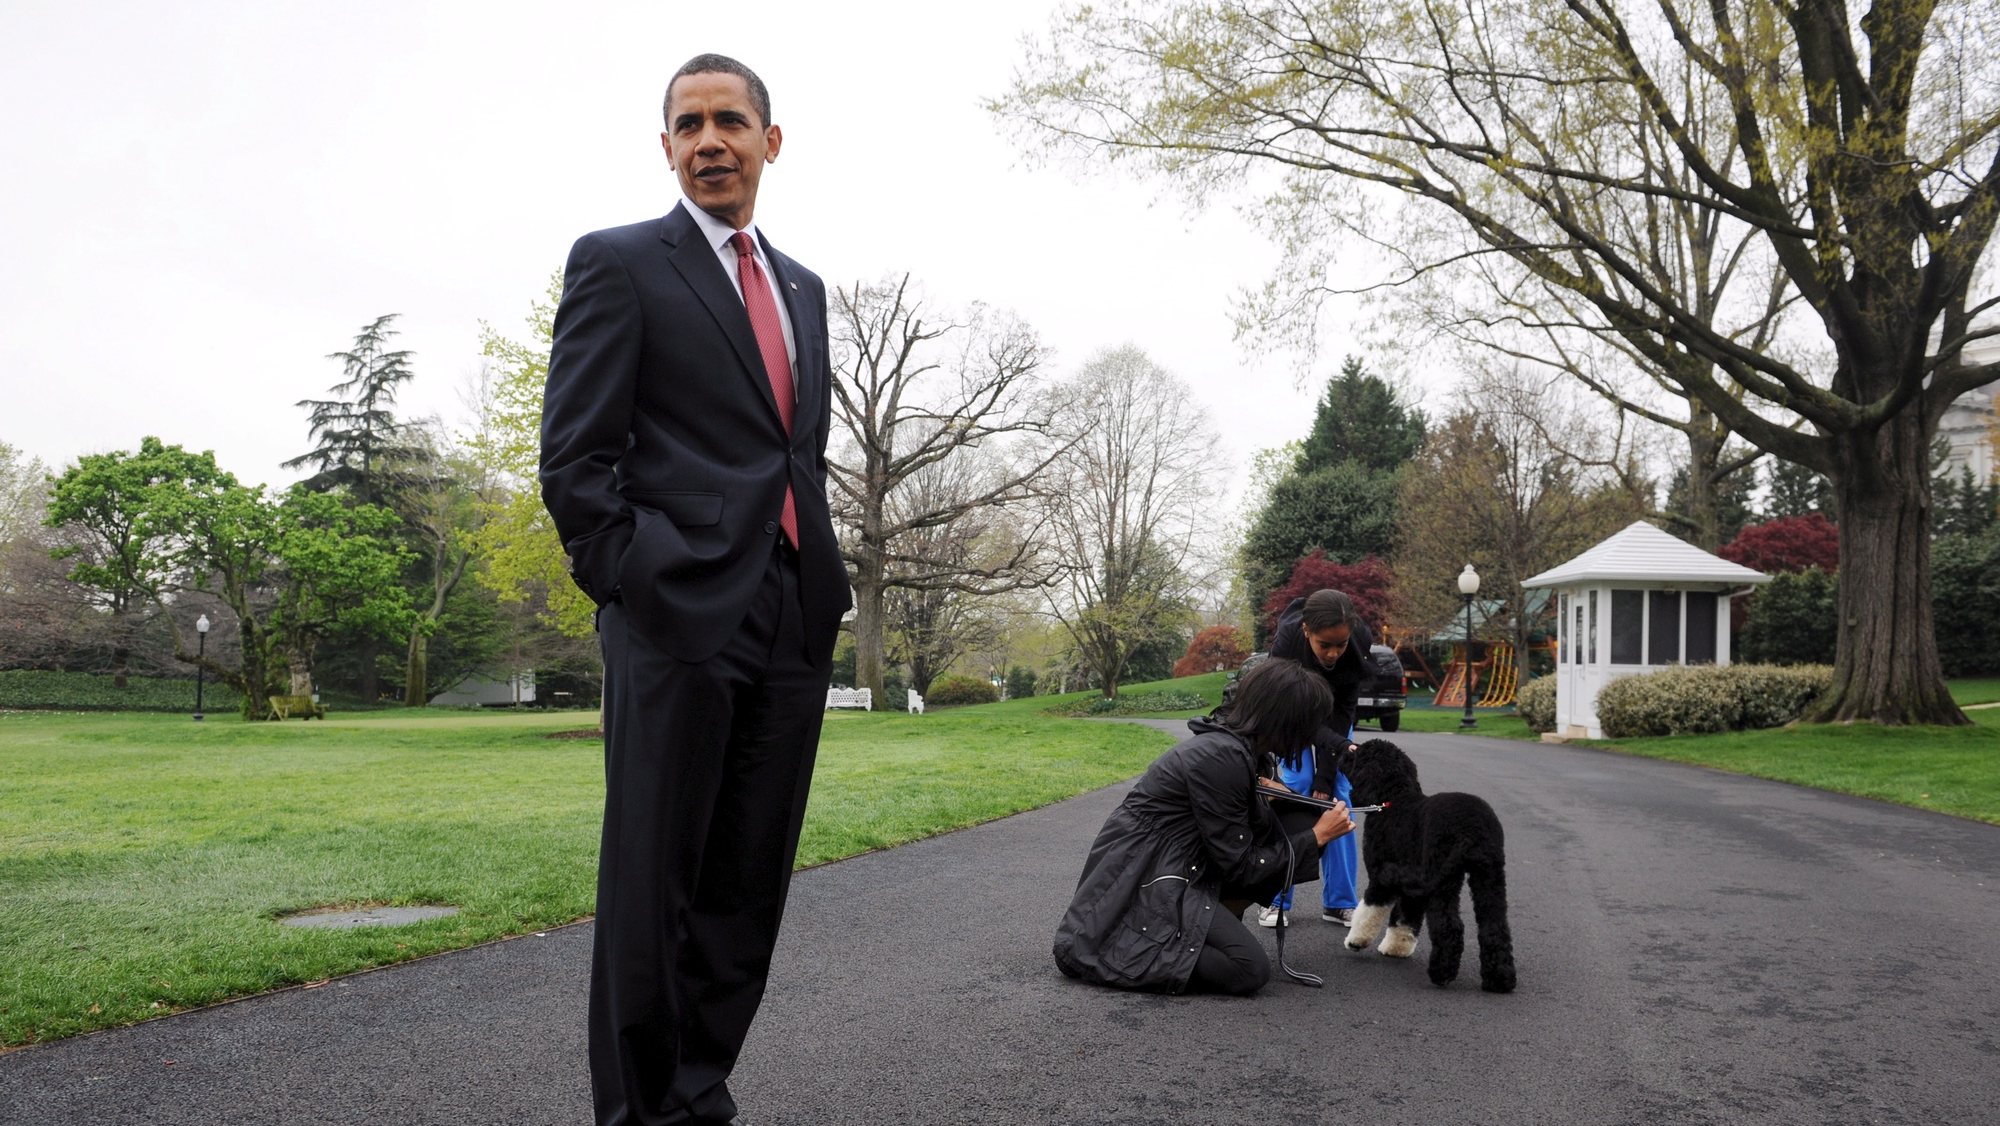 epa09186447 (FILE) - US President Barack Obama (L), speaks to members of the press while First Lady Michelle Obama (back L) and one of their daughters Malia (back R) play with the new White House dog Bo, a six-month-old black-and-white Portuguese water dog, at the South Lawn of the White House in Washington, DC, USA, 14 April 2009 (Reissued 08 May 2021). Former US President Barack Obama and First Lady Michelle Obama announced on 08 May that their dog Bo has died of cancer.  EPA/MICHAEL REYNOLDS